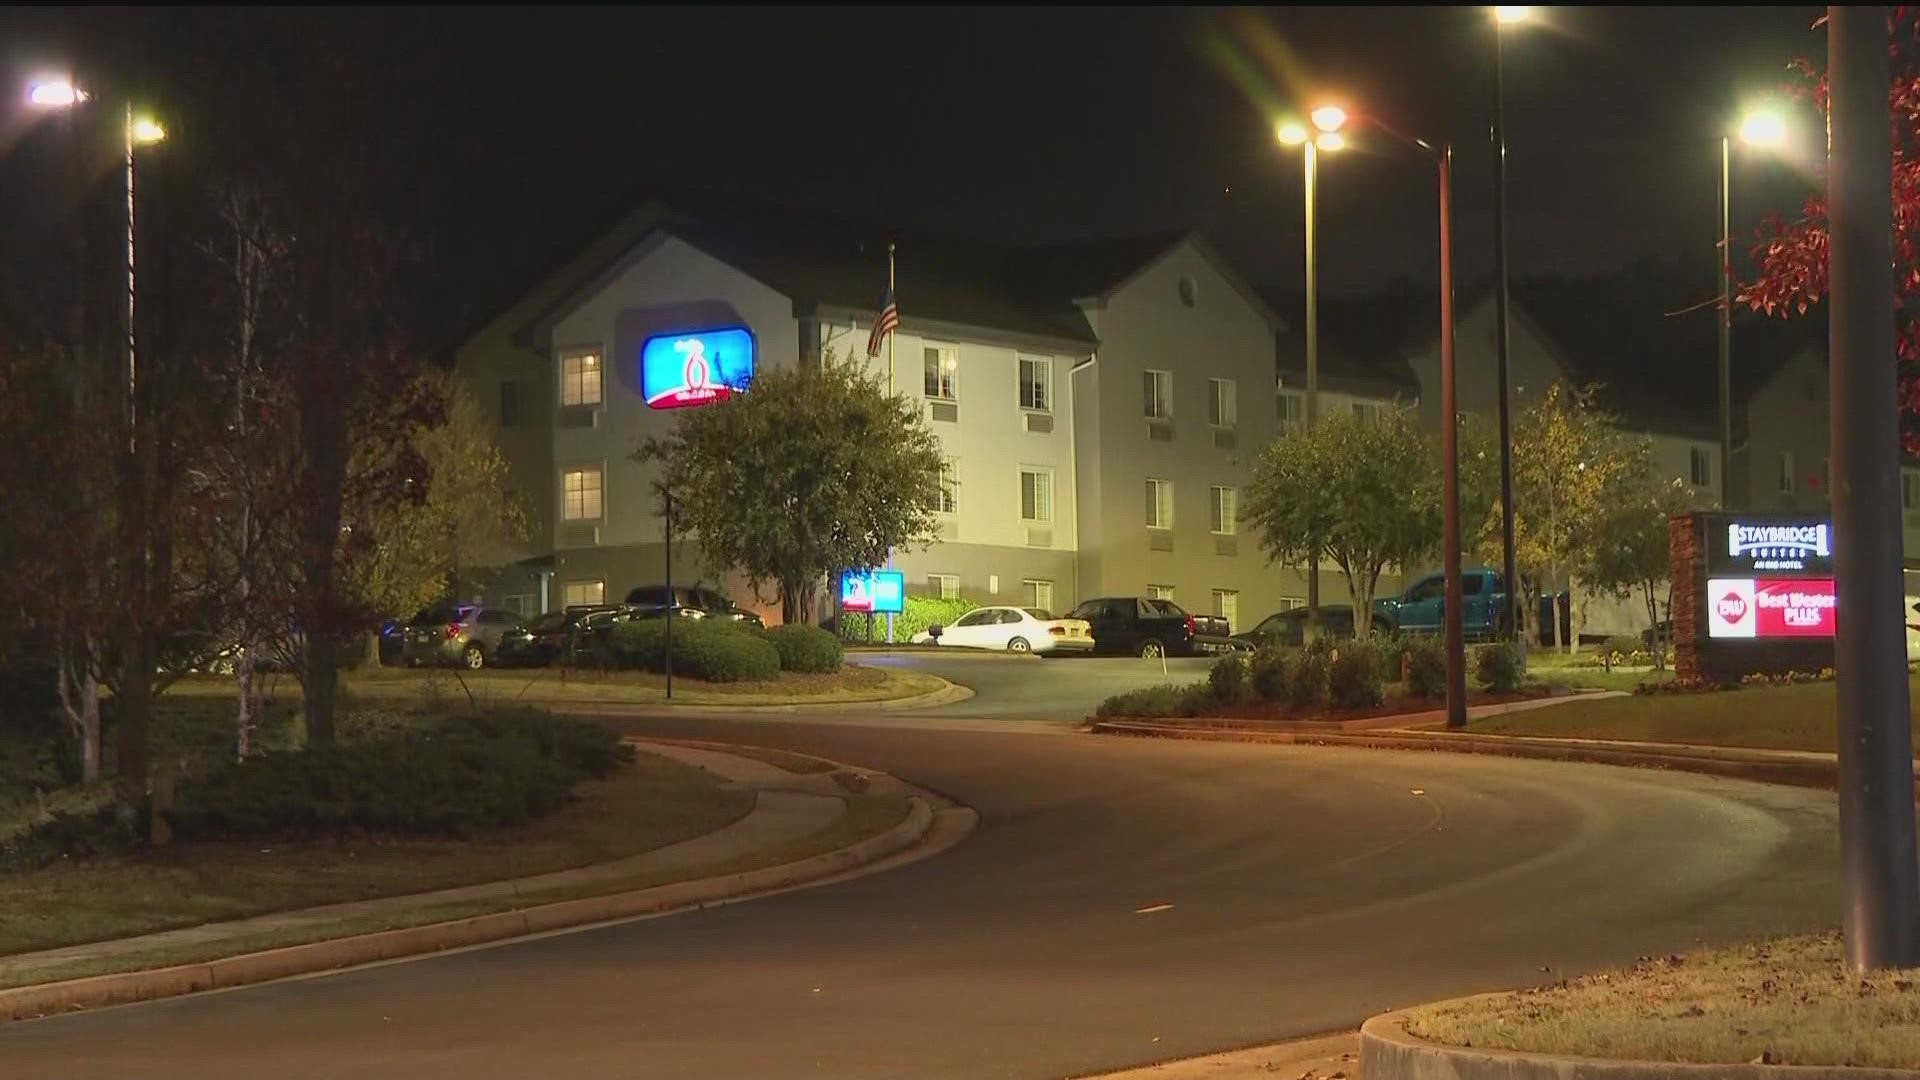 Gwinnett County Homicide Unit detectives are investigating a murder that happened in the parking lot of an extended stay hotel in Duluth Wednesday night.